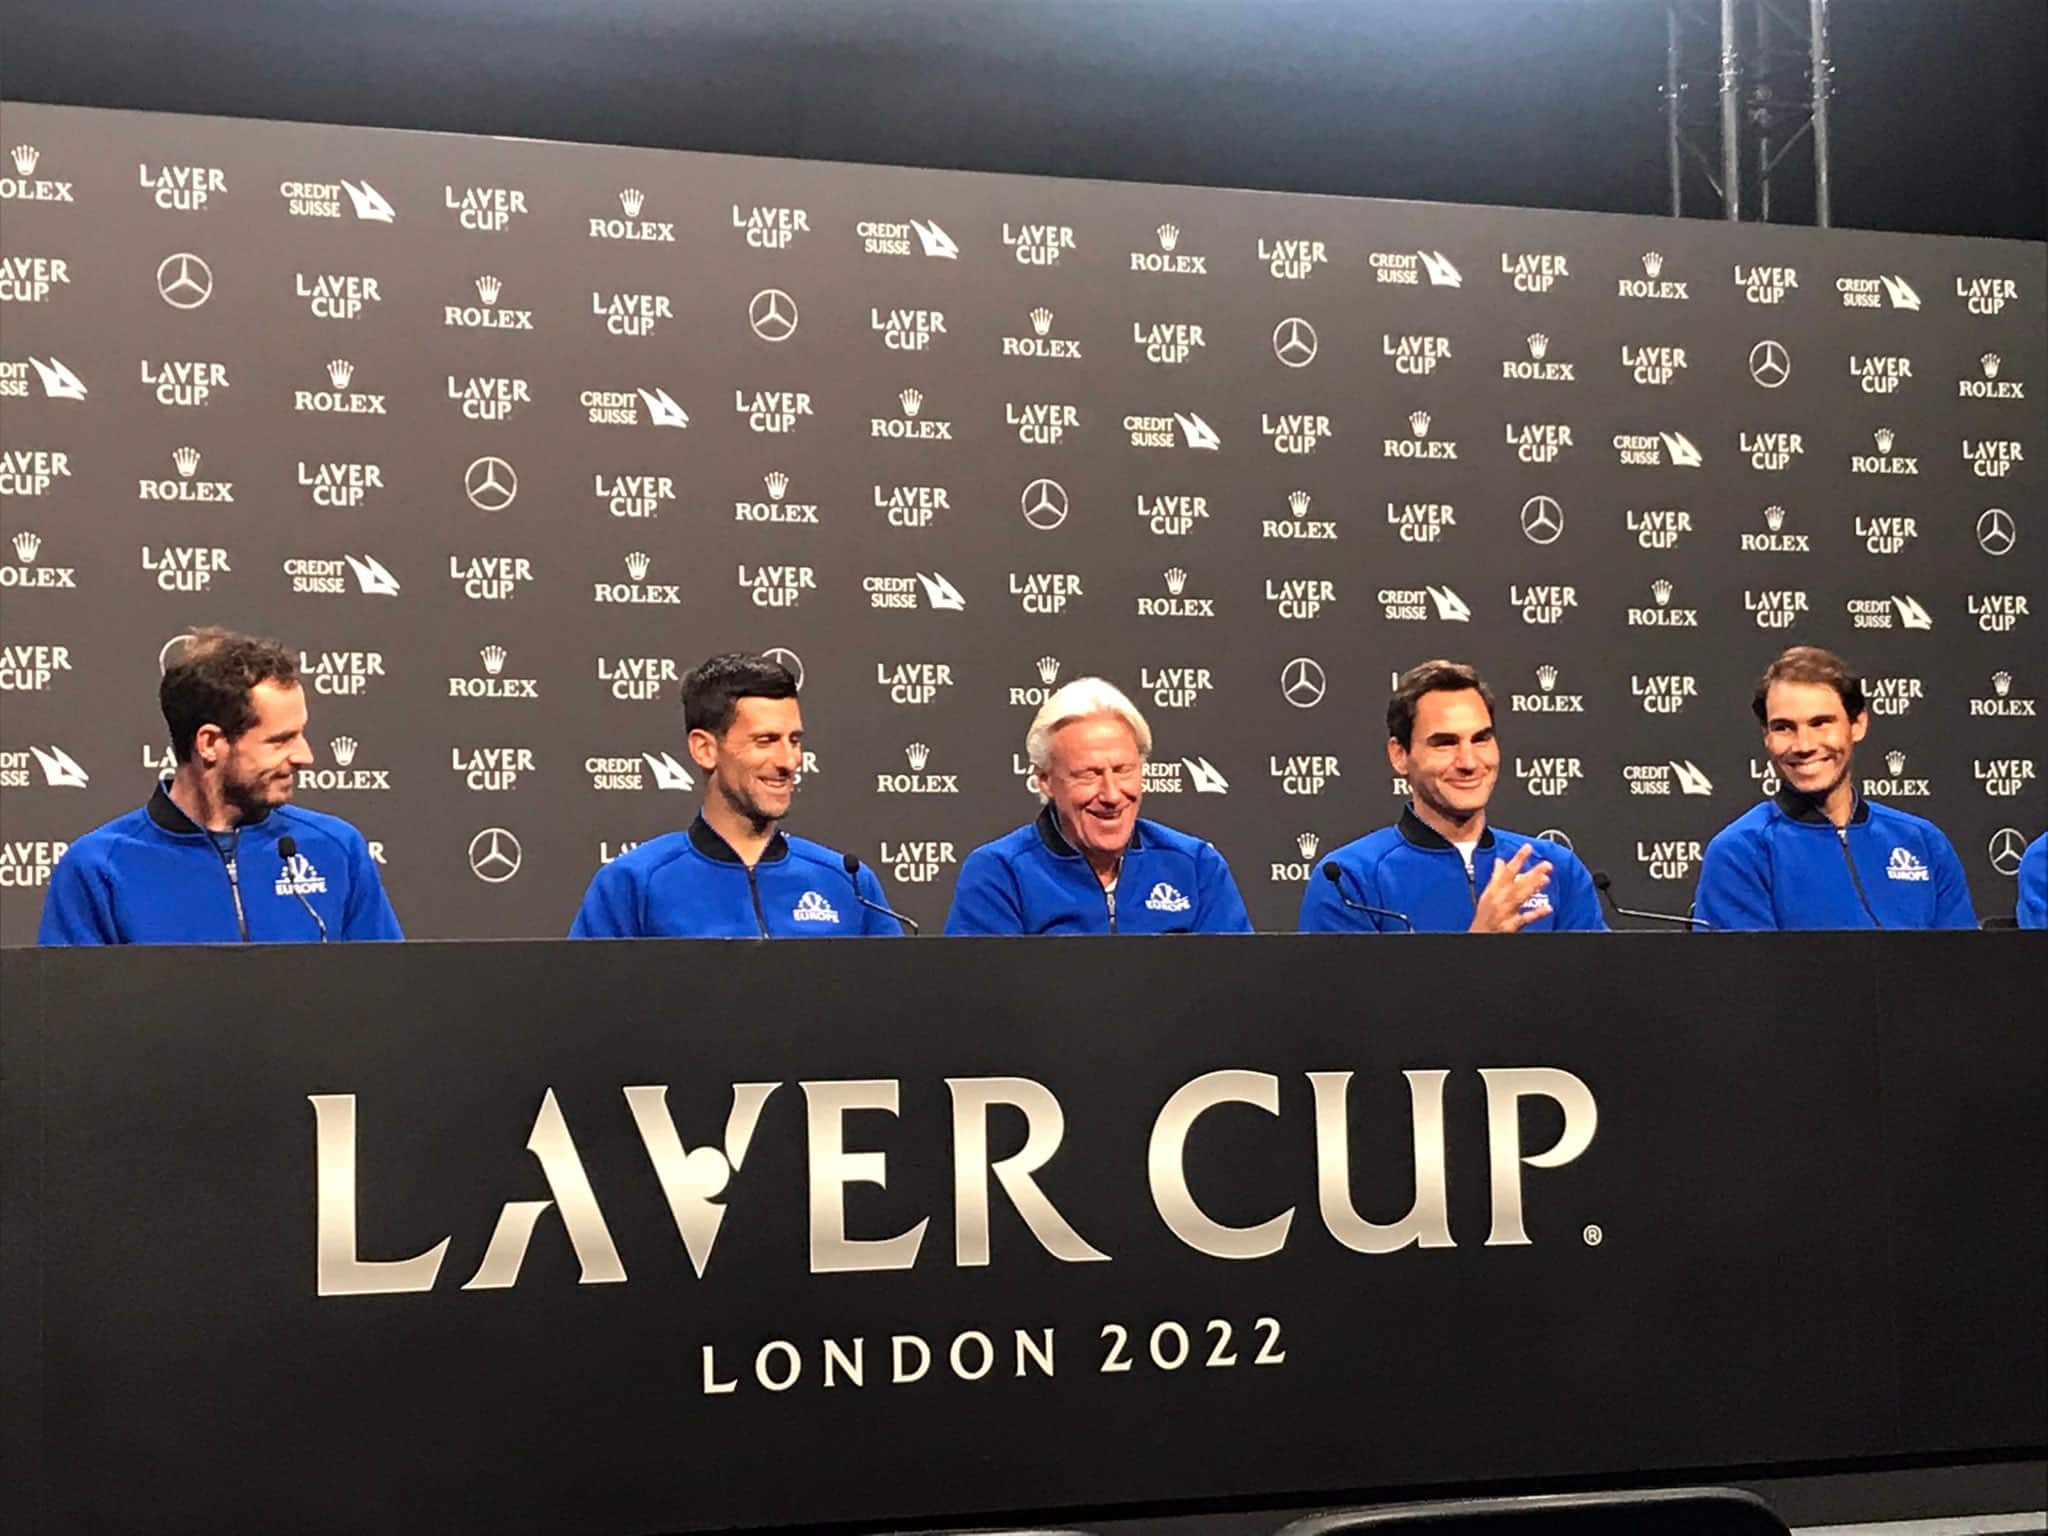 Roger Federer's last match will be doubles with Rafael Nadal as partner at Laver Cup SEE PICS